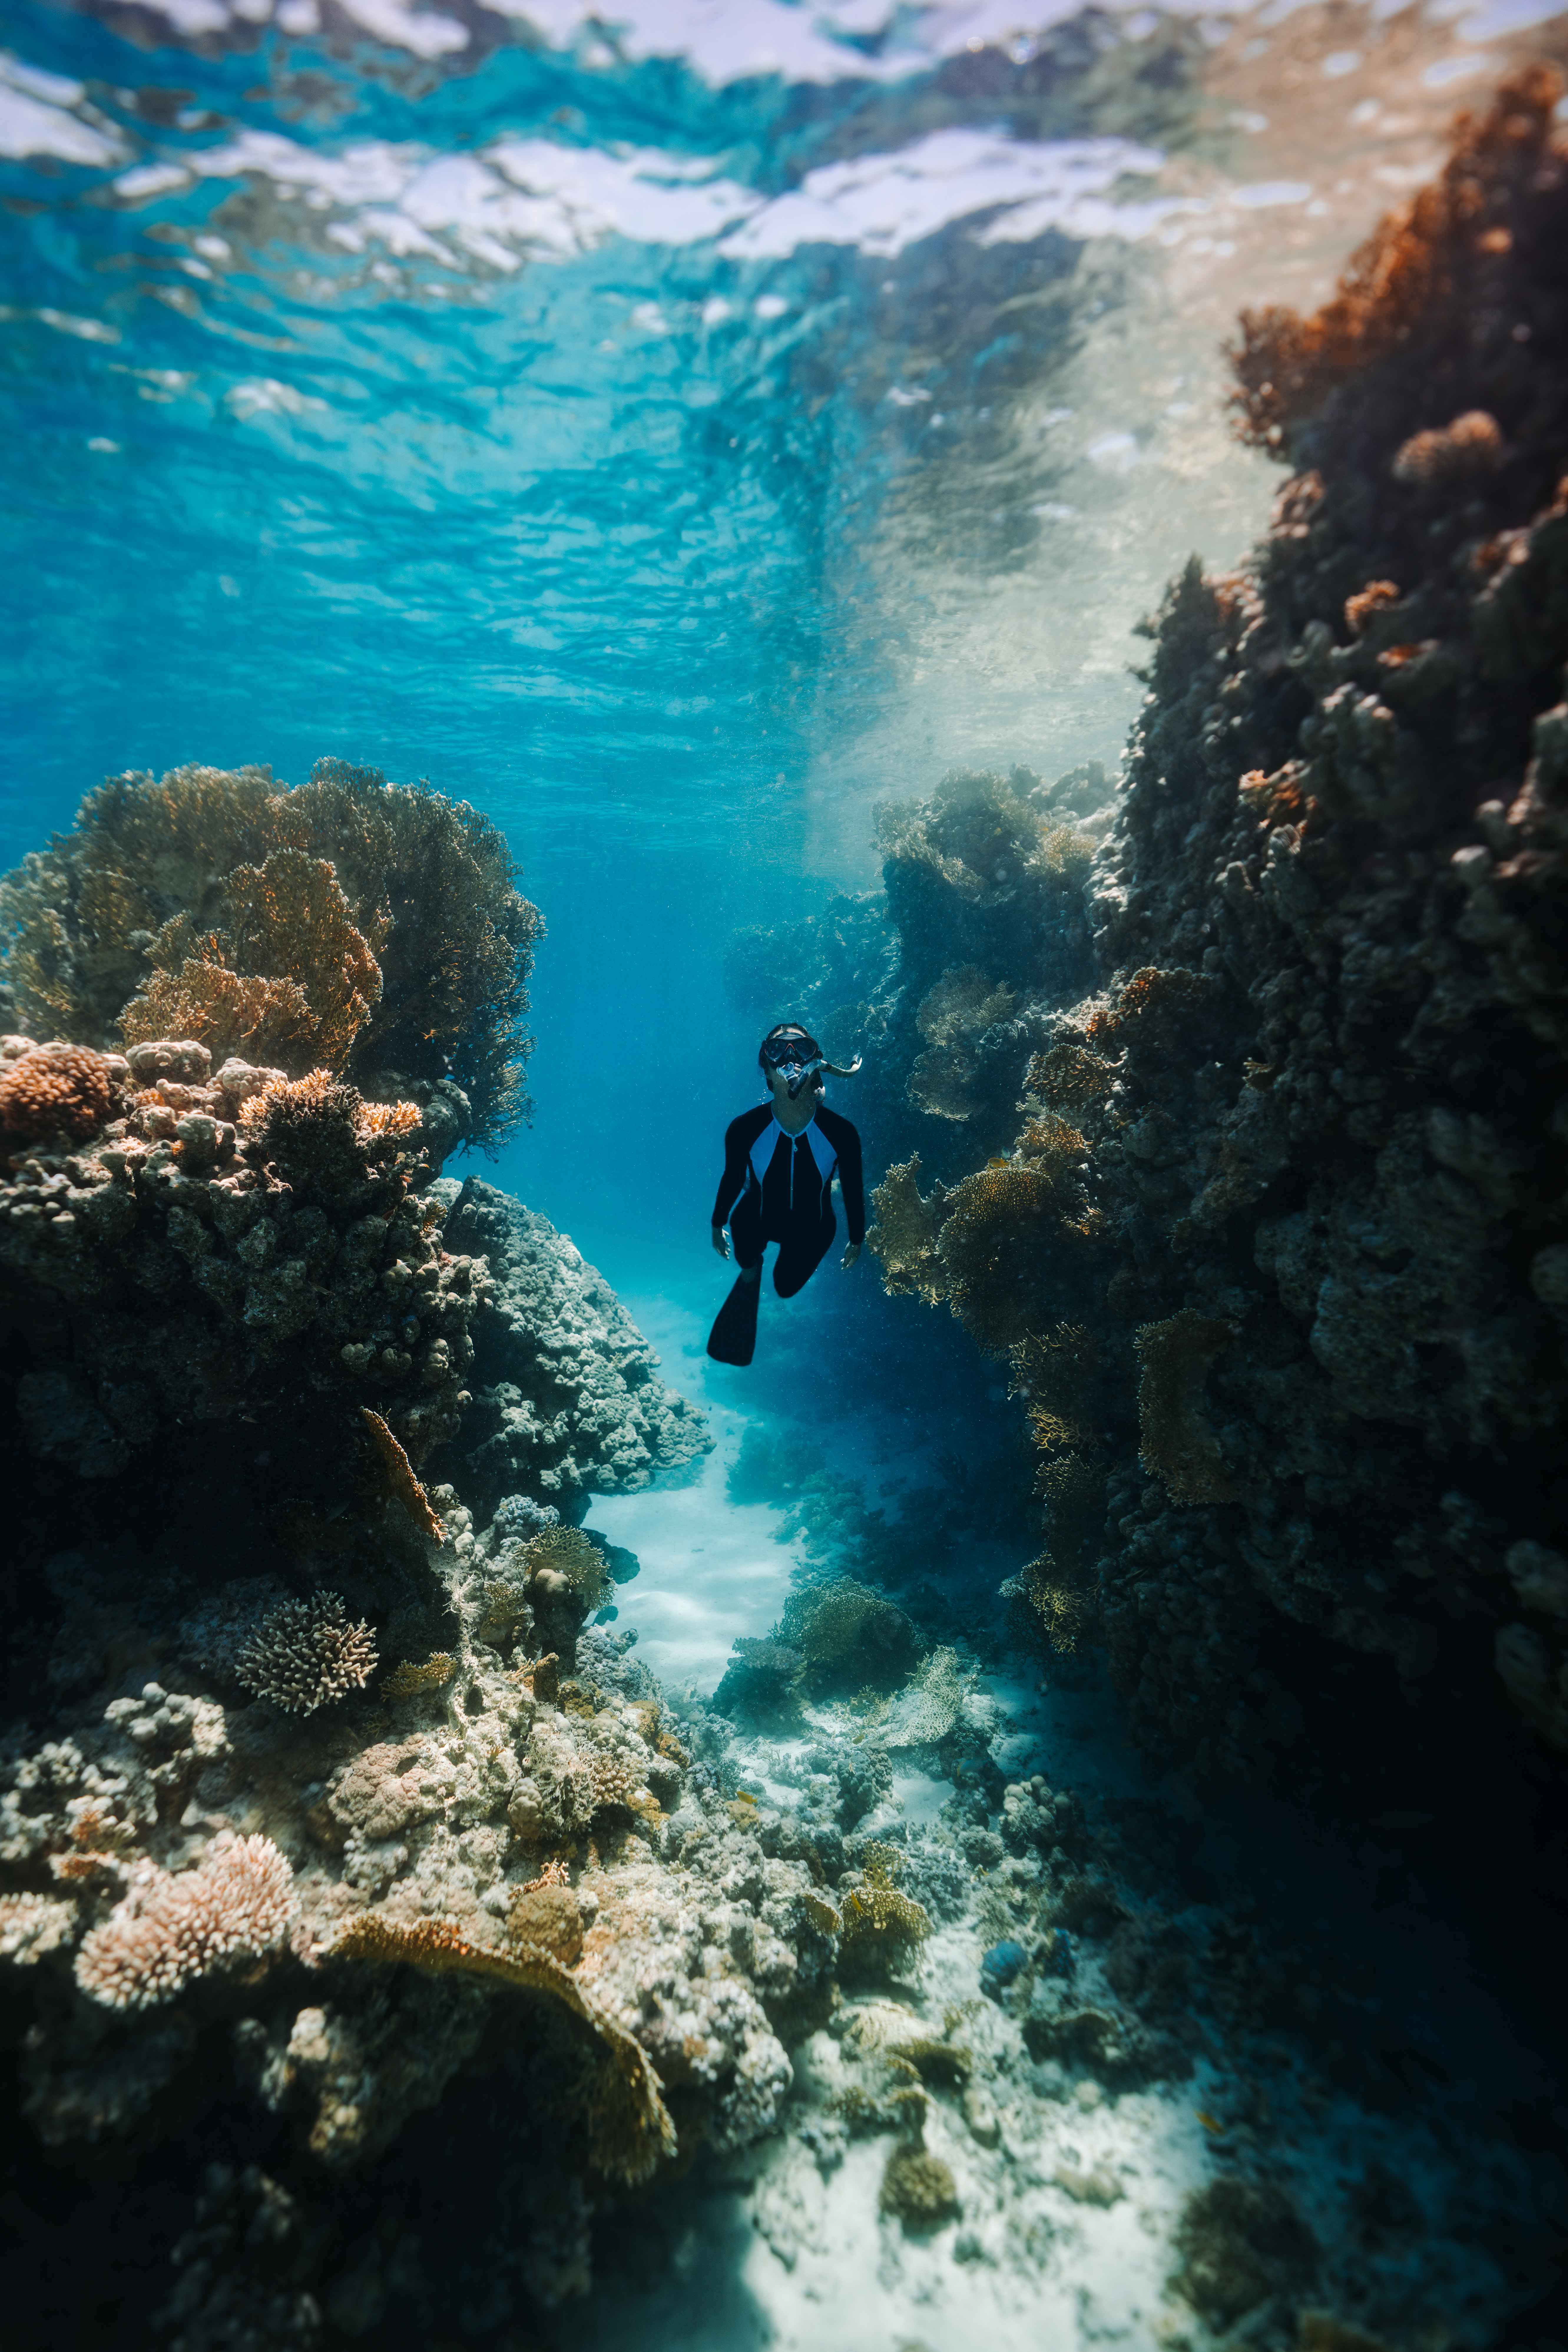 A swimmer is enjoying the captivating underwater scenery in the Red Sea, near a coral reef teeming with vibrant marine life.